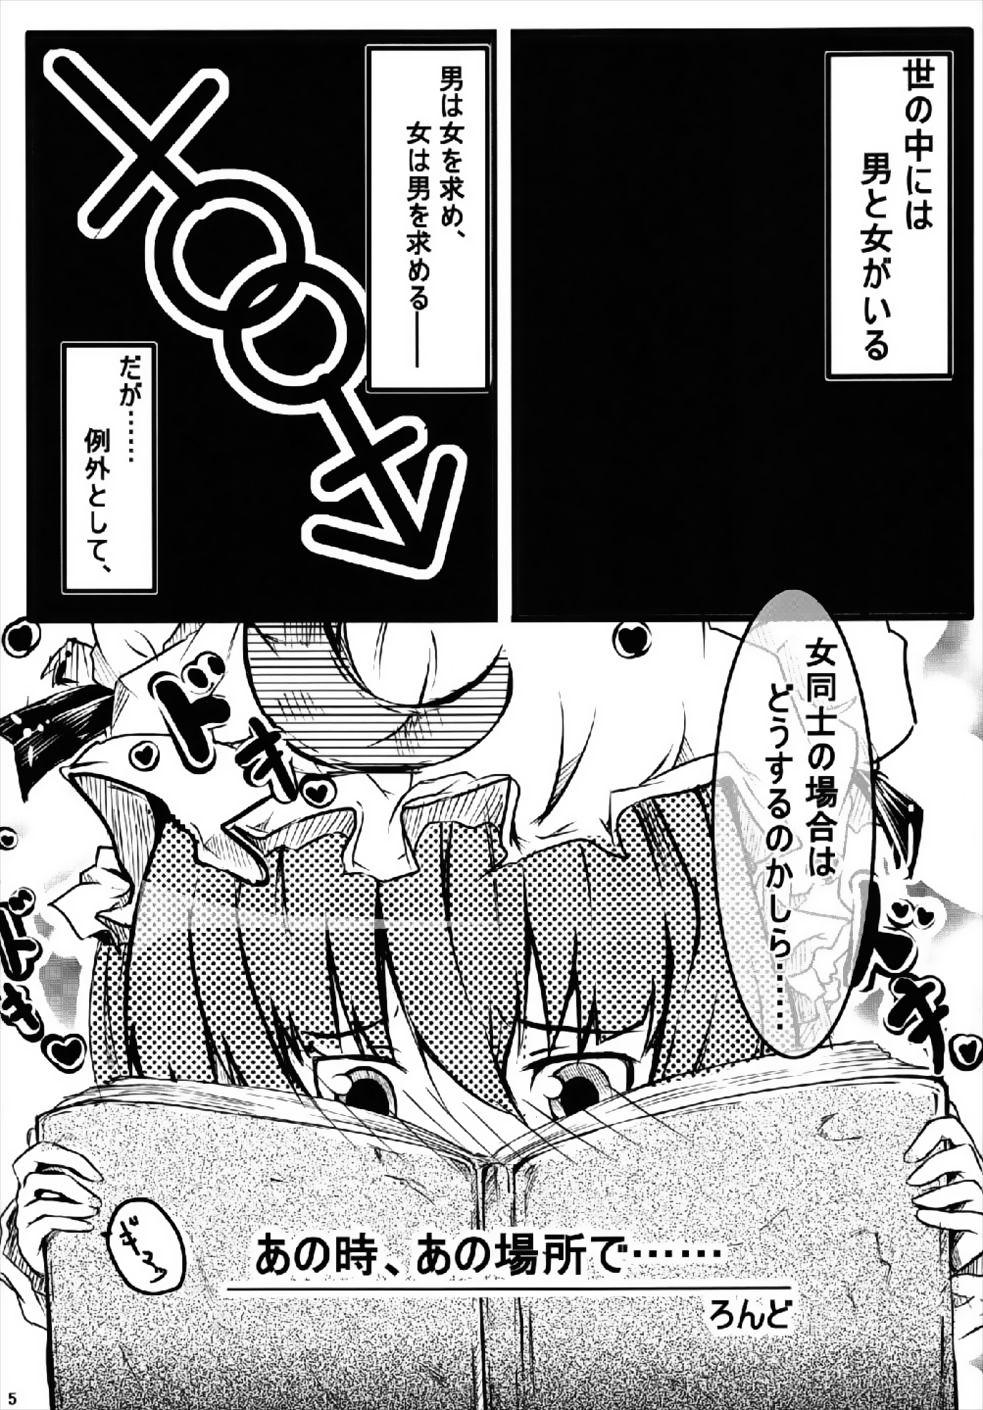 Cock Suck RemiFlaPatche! - Touhou project Cams - Page 4